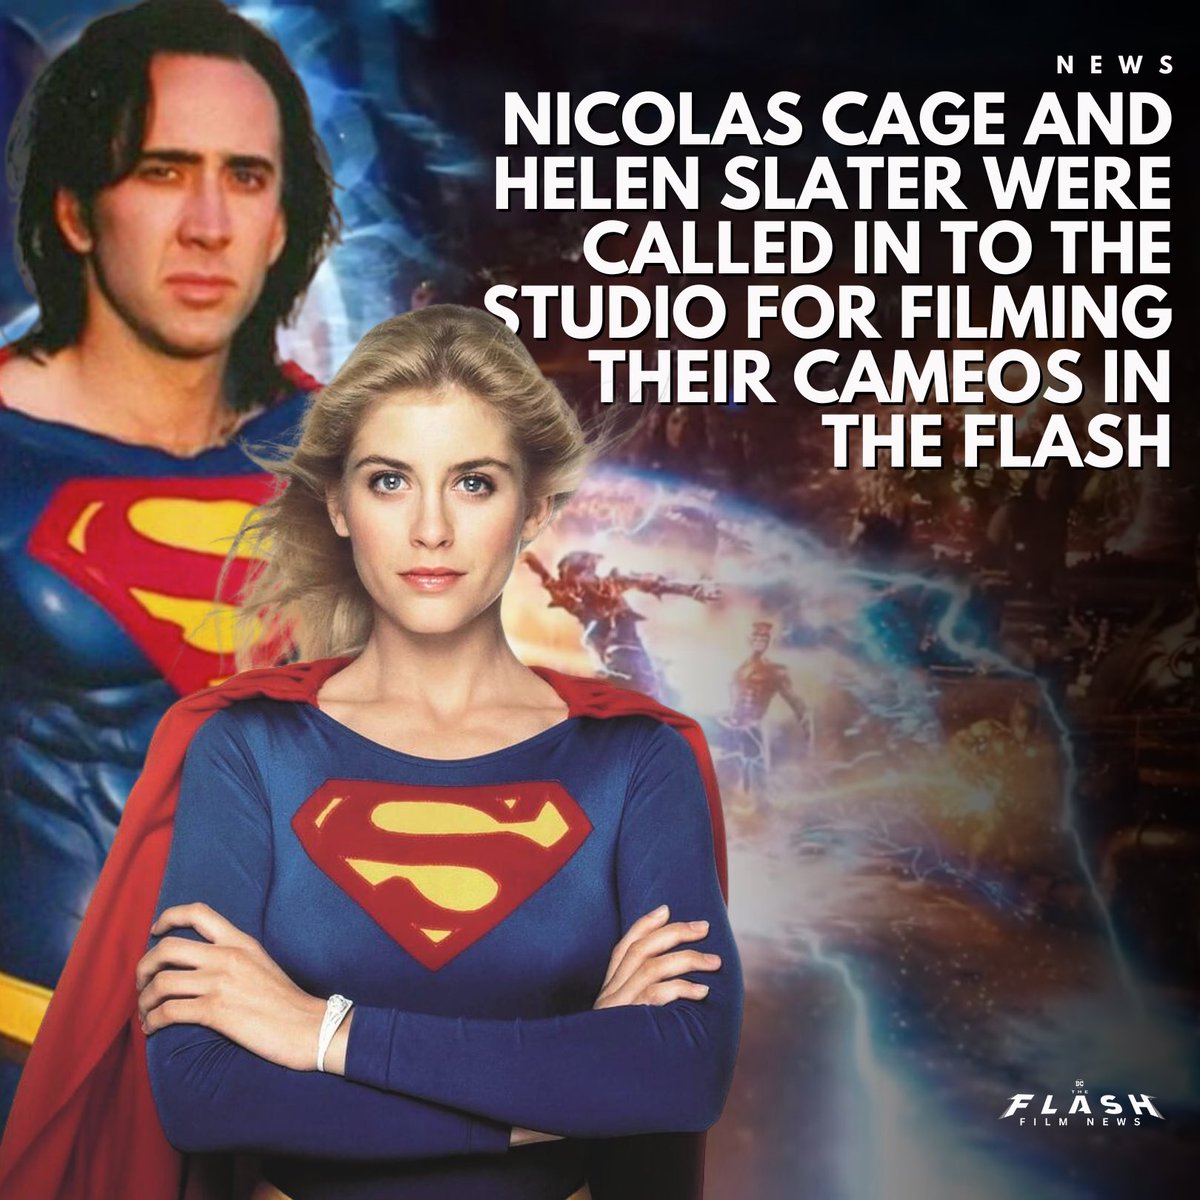 Nicolas Cage and Helen Slater were called in to the studio for filming their cameos in THE FLASH. 

The Muschiettis brought in the original costume designer for Superman Lives to create Cage’s suit that he wore for the surprising cameo. #TheFlashMovie